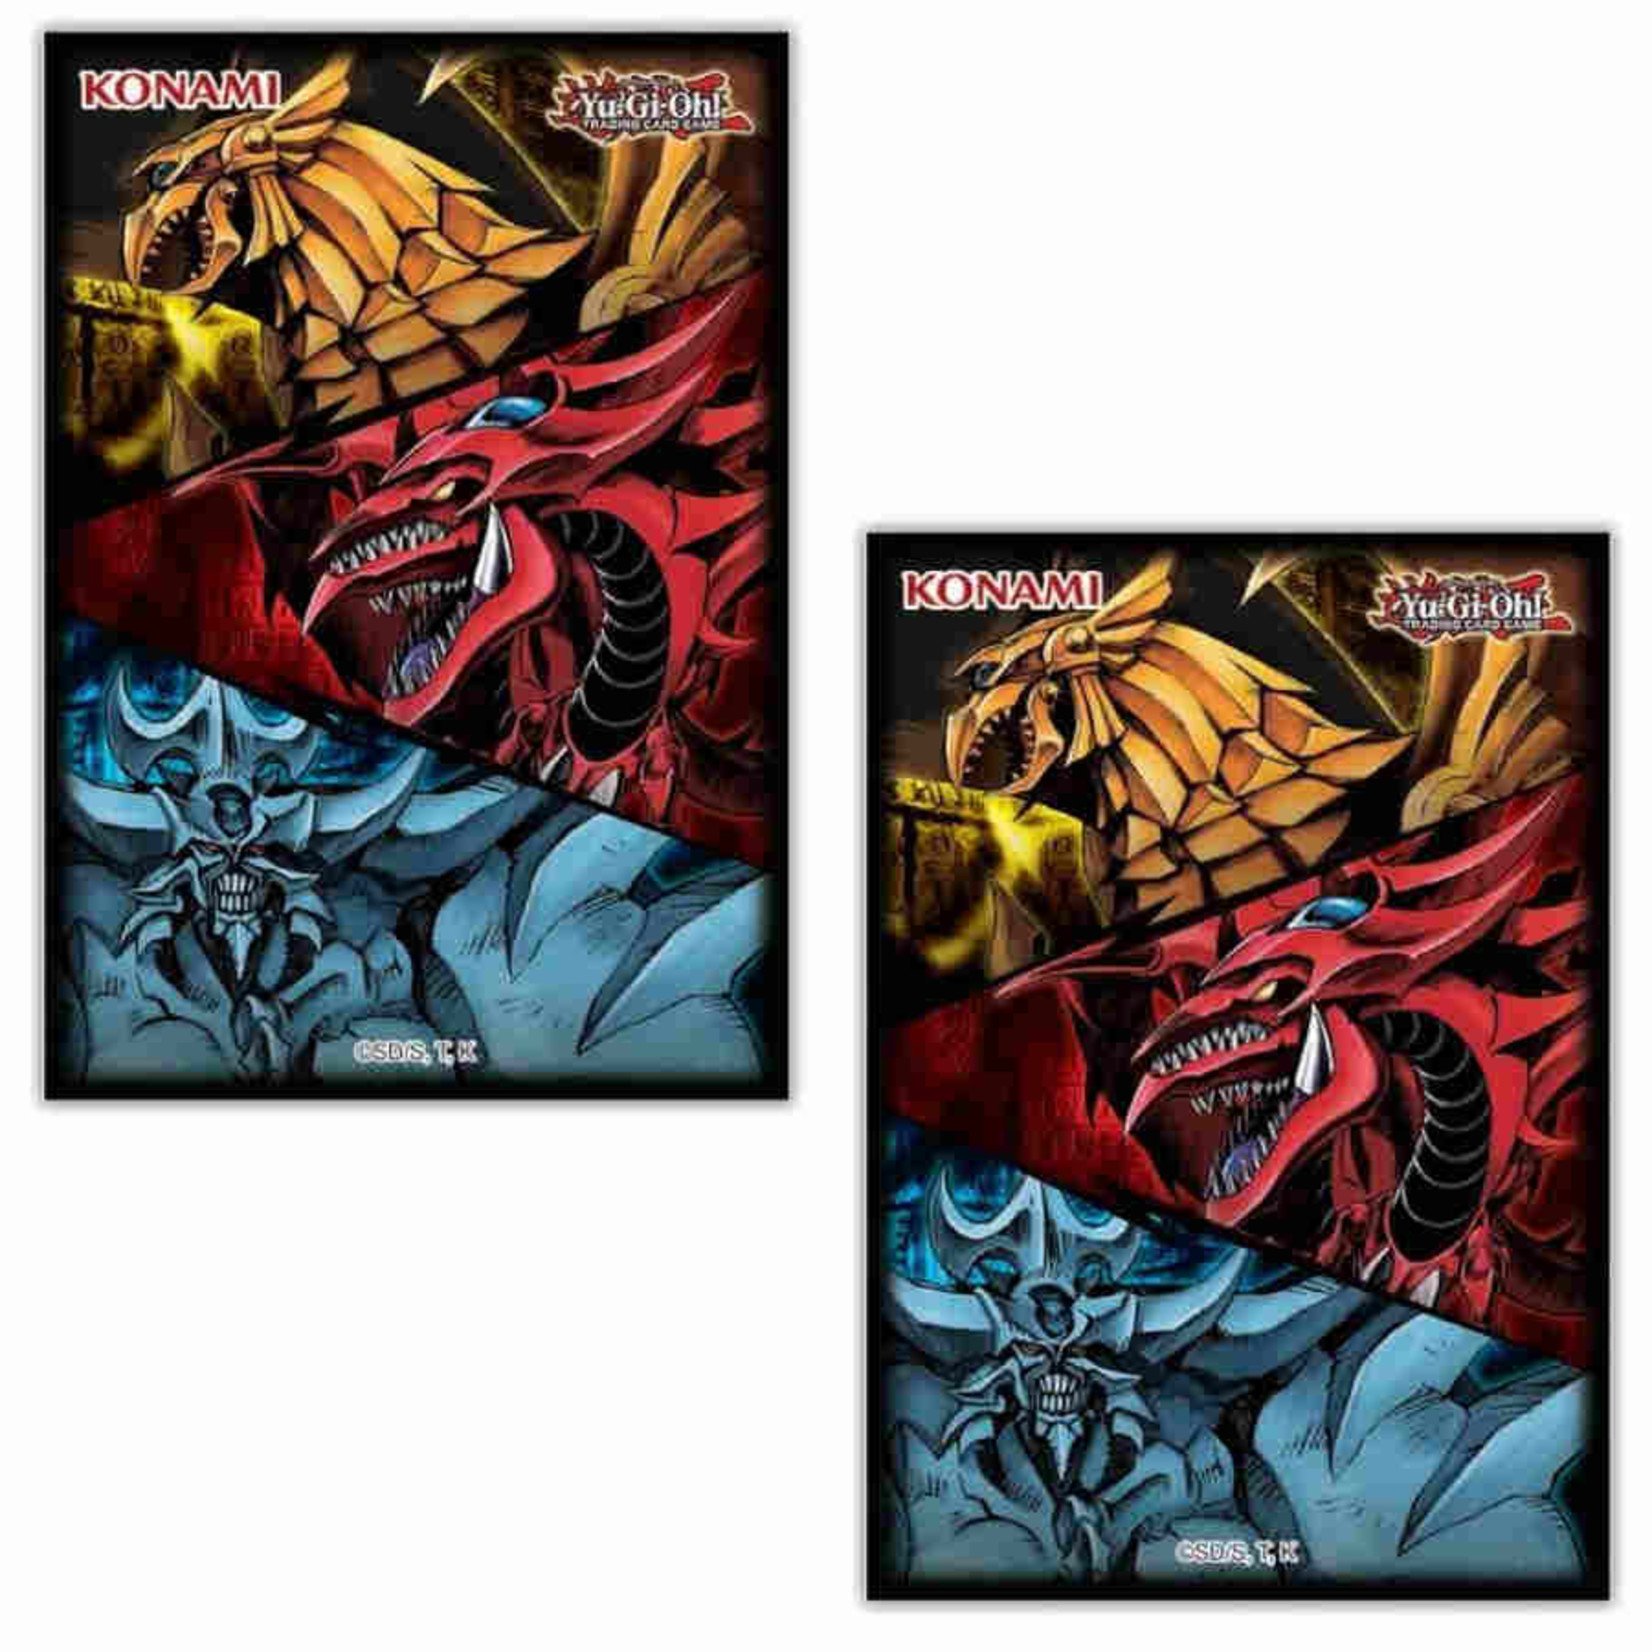 Yugioh Card Back Sleeves 50ct